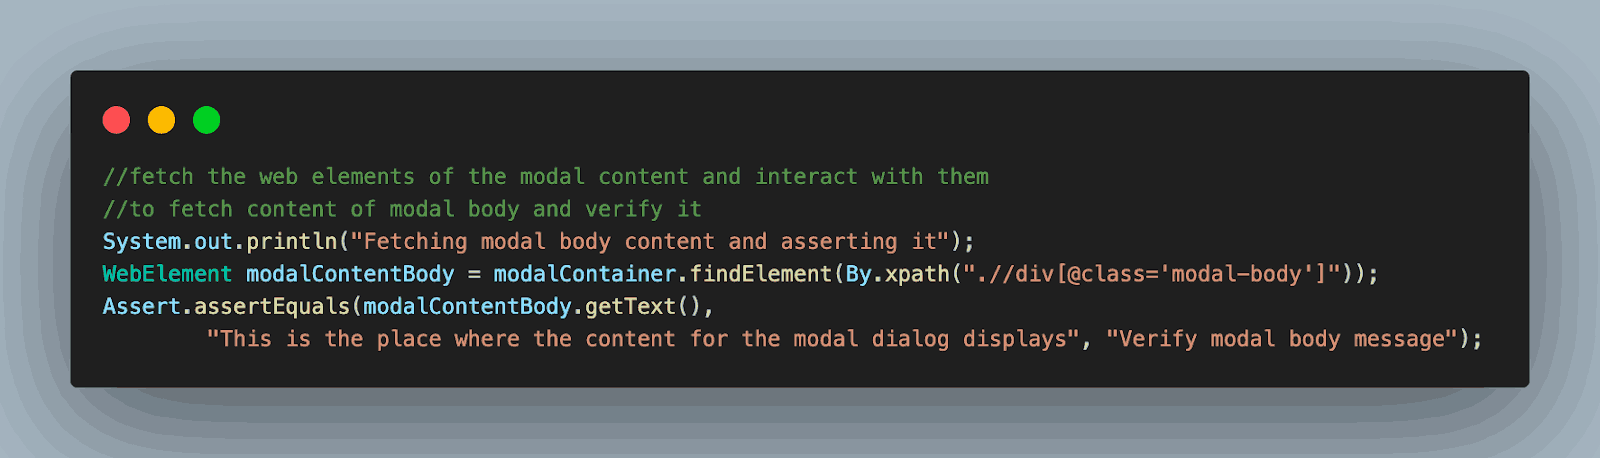 fetch and assert the content body of the modal dialog box.